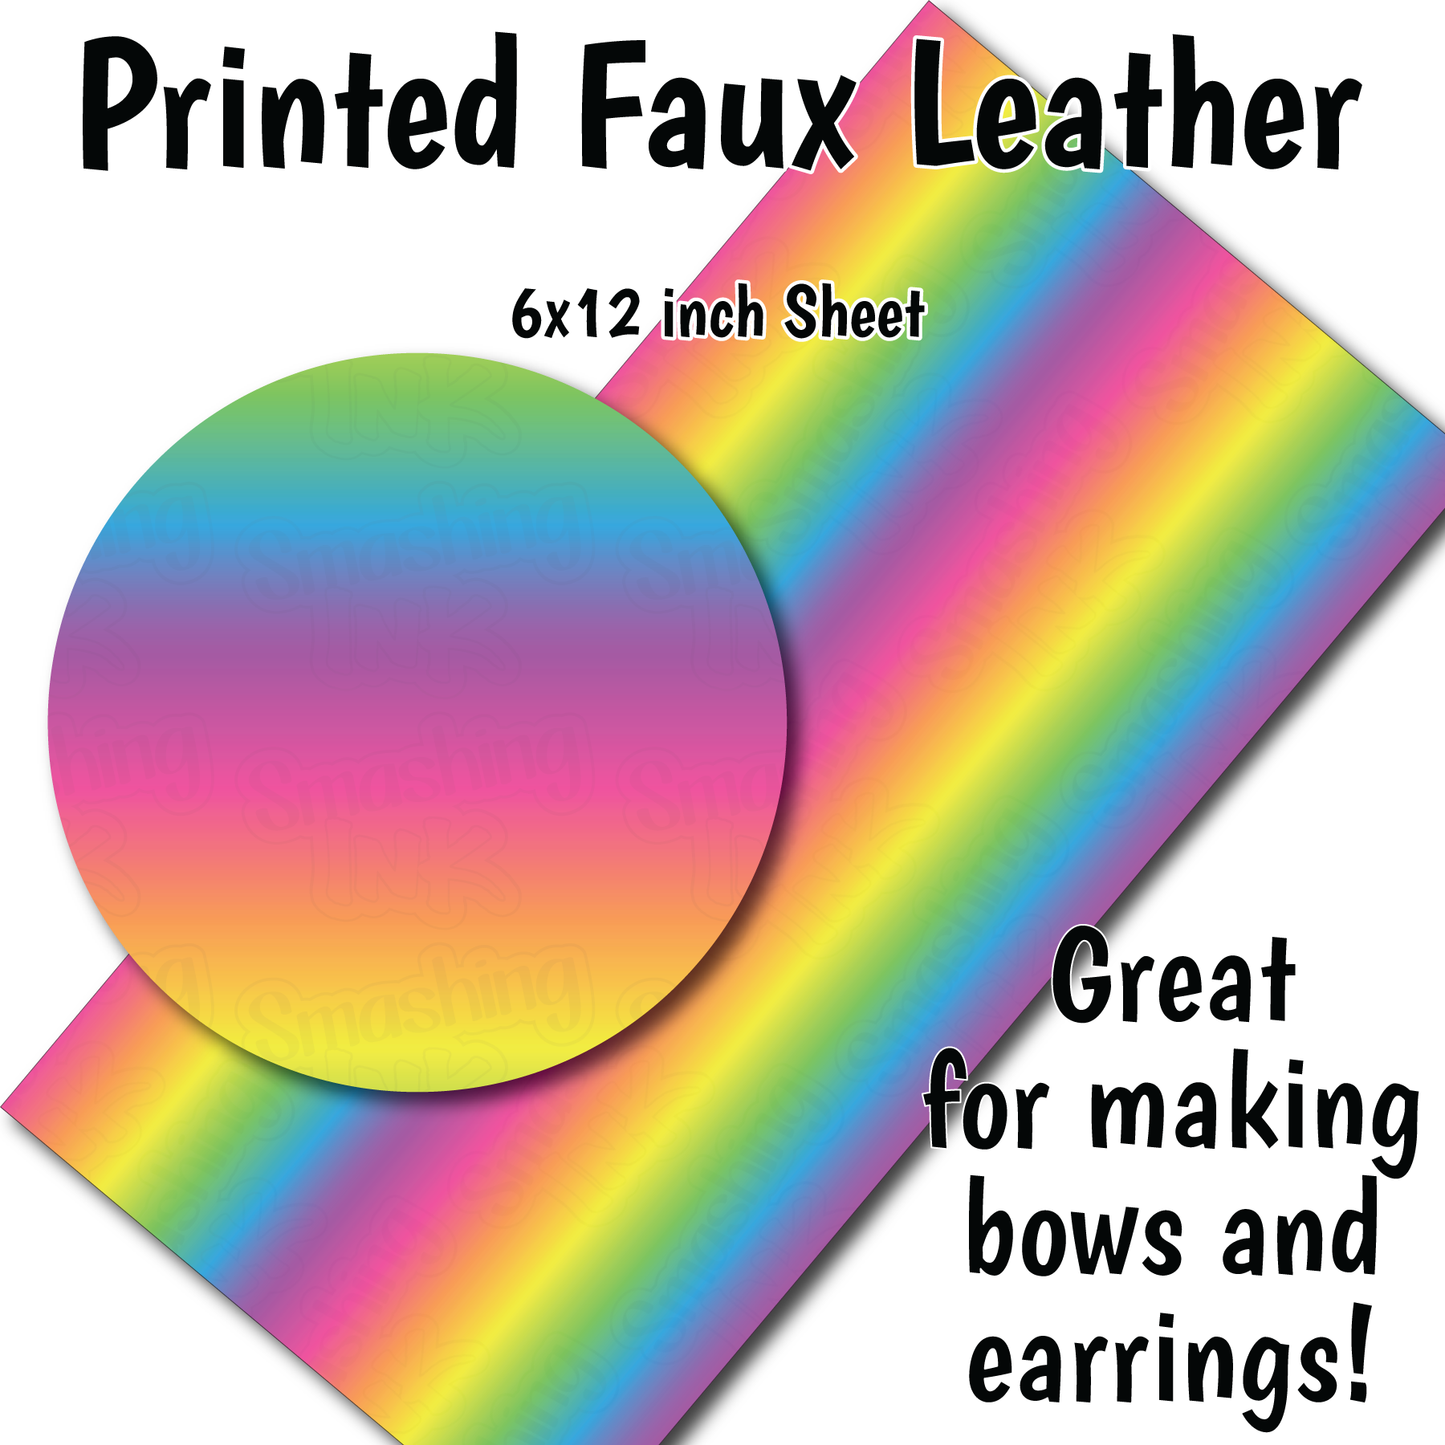 Rainbow Ombre W - Faux Leather Sheet (SHIPS IN 3 BUS DAYS)